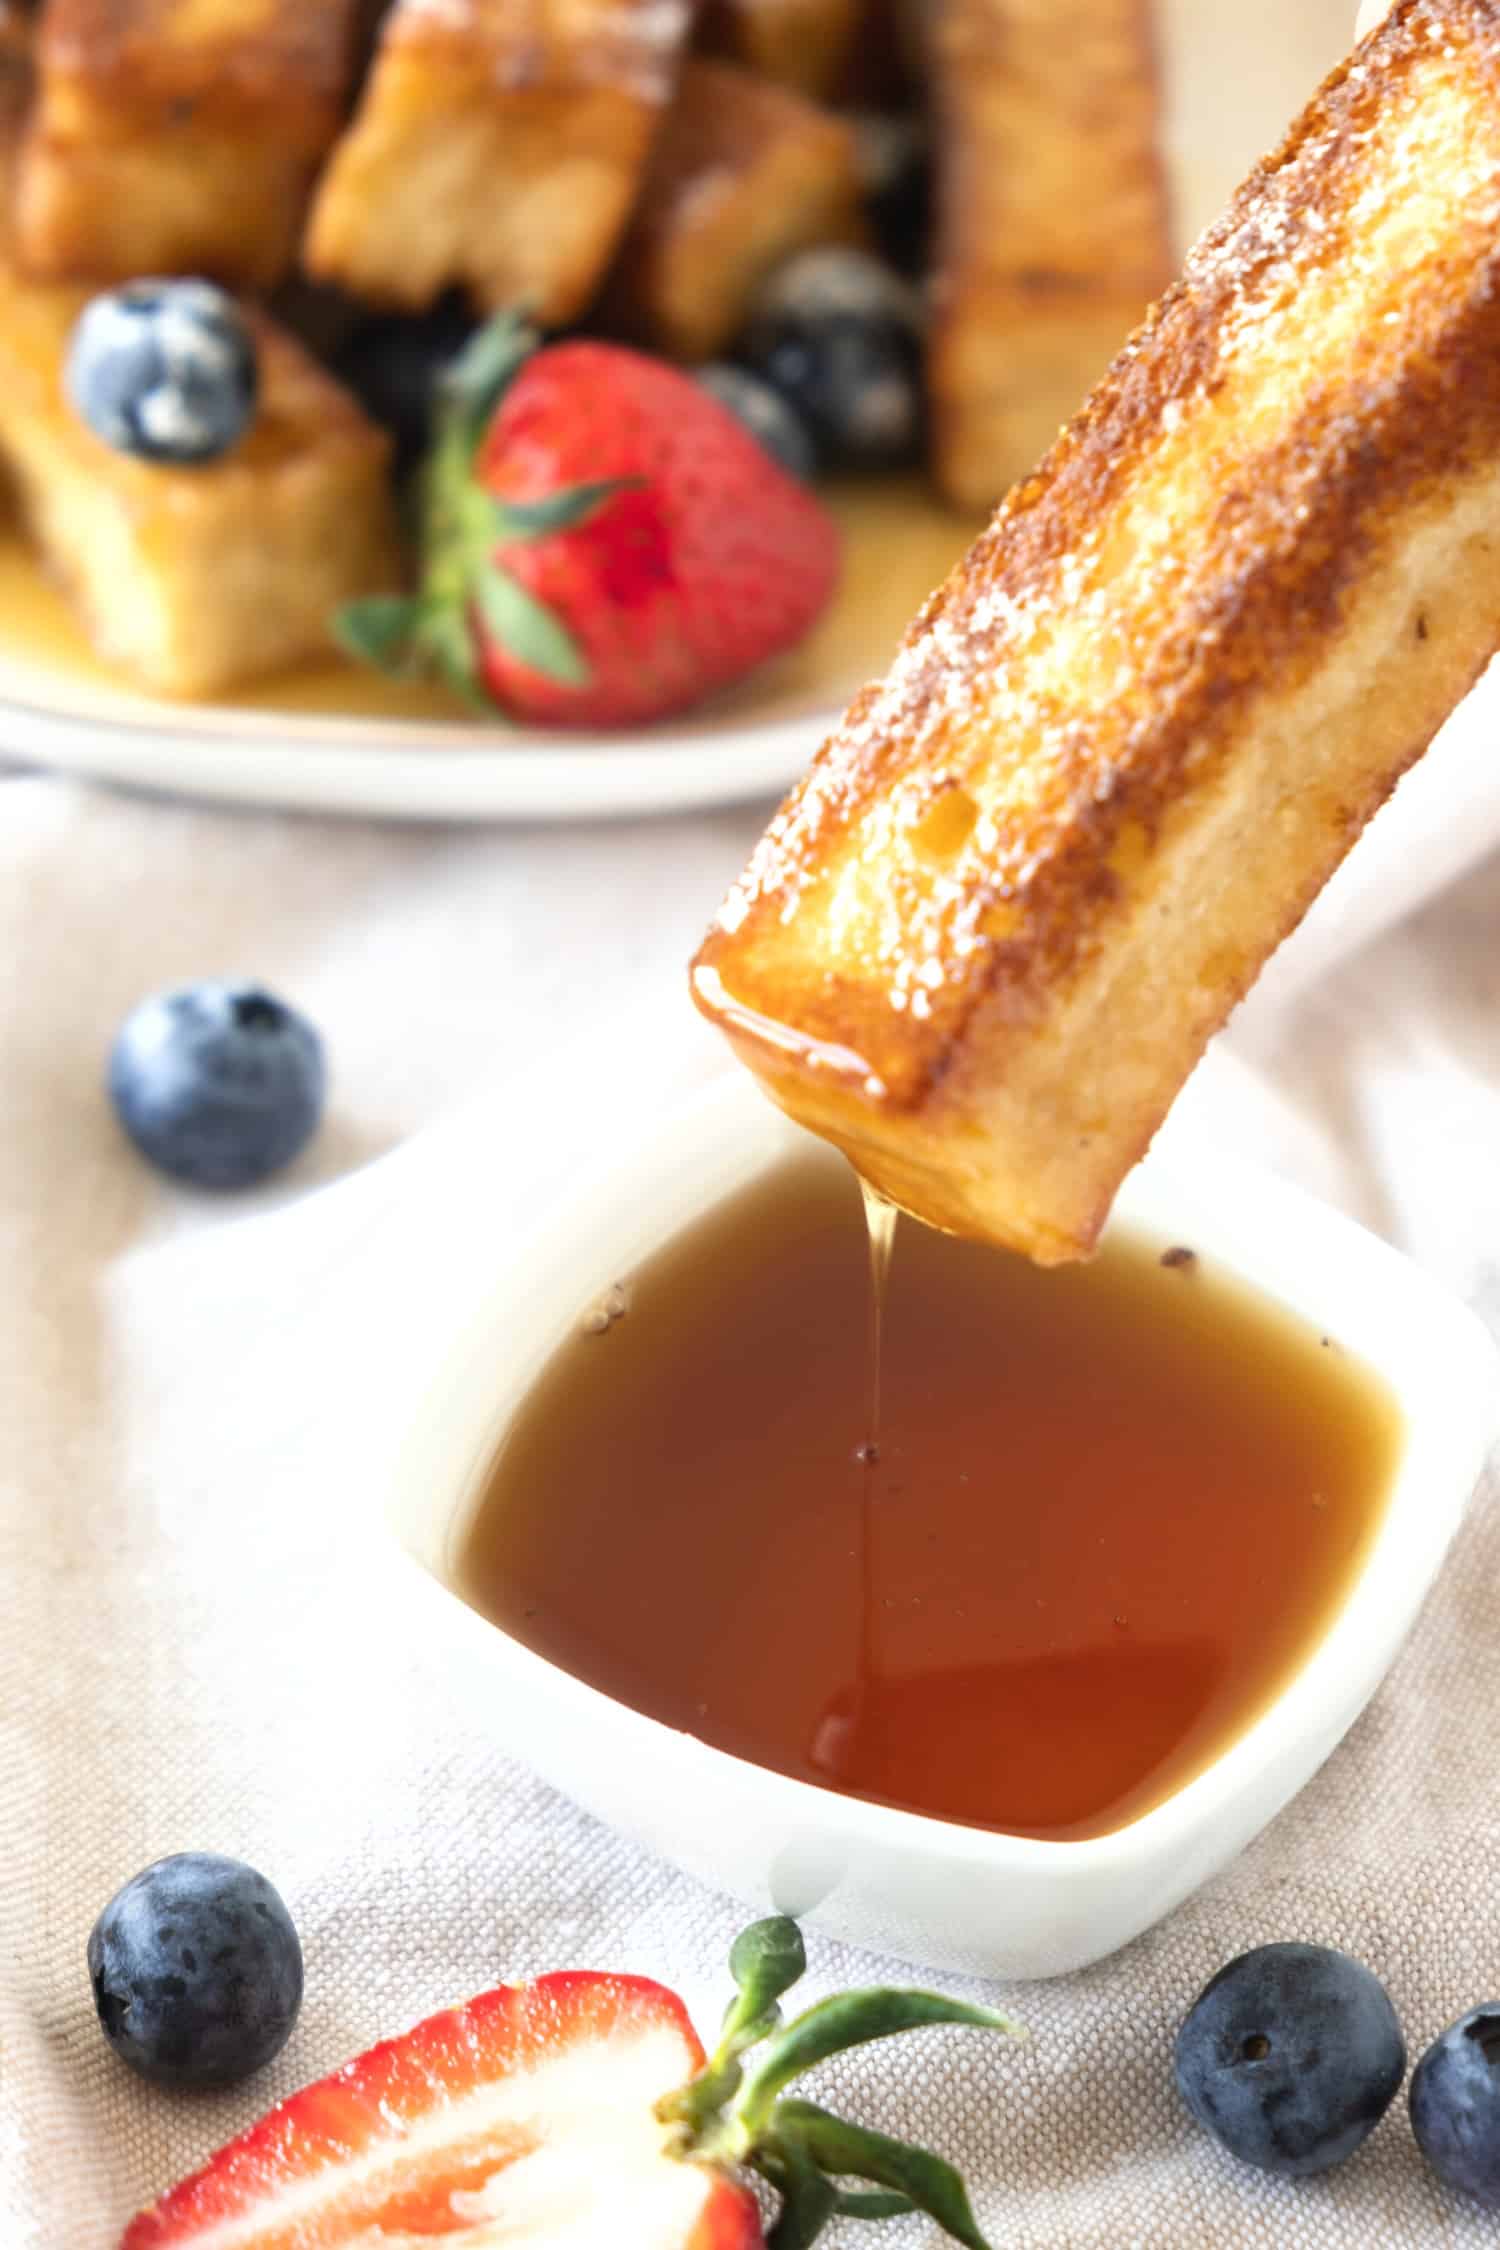 Dipping a French toast stick into a small bowl of maple syrup.